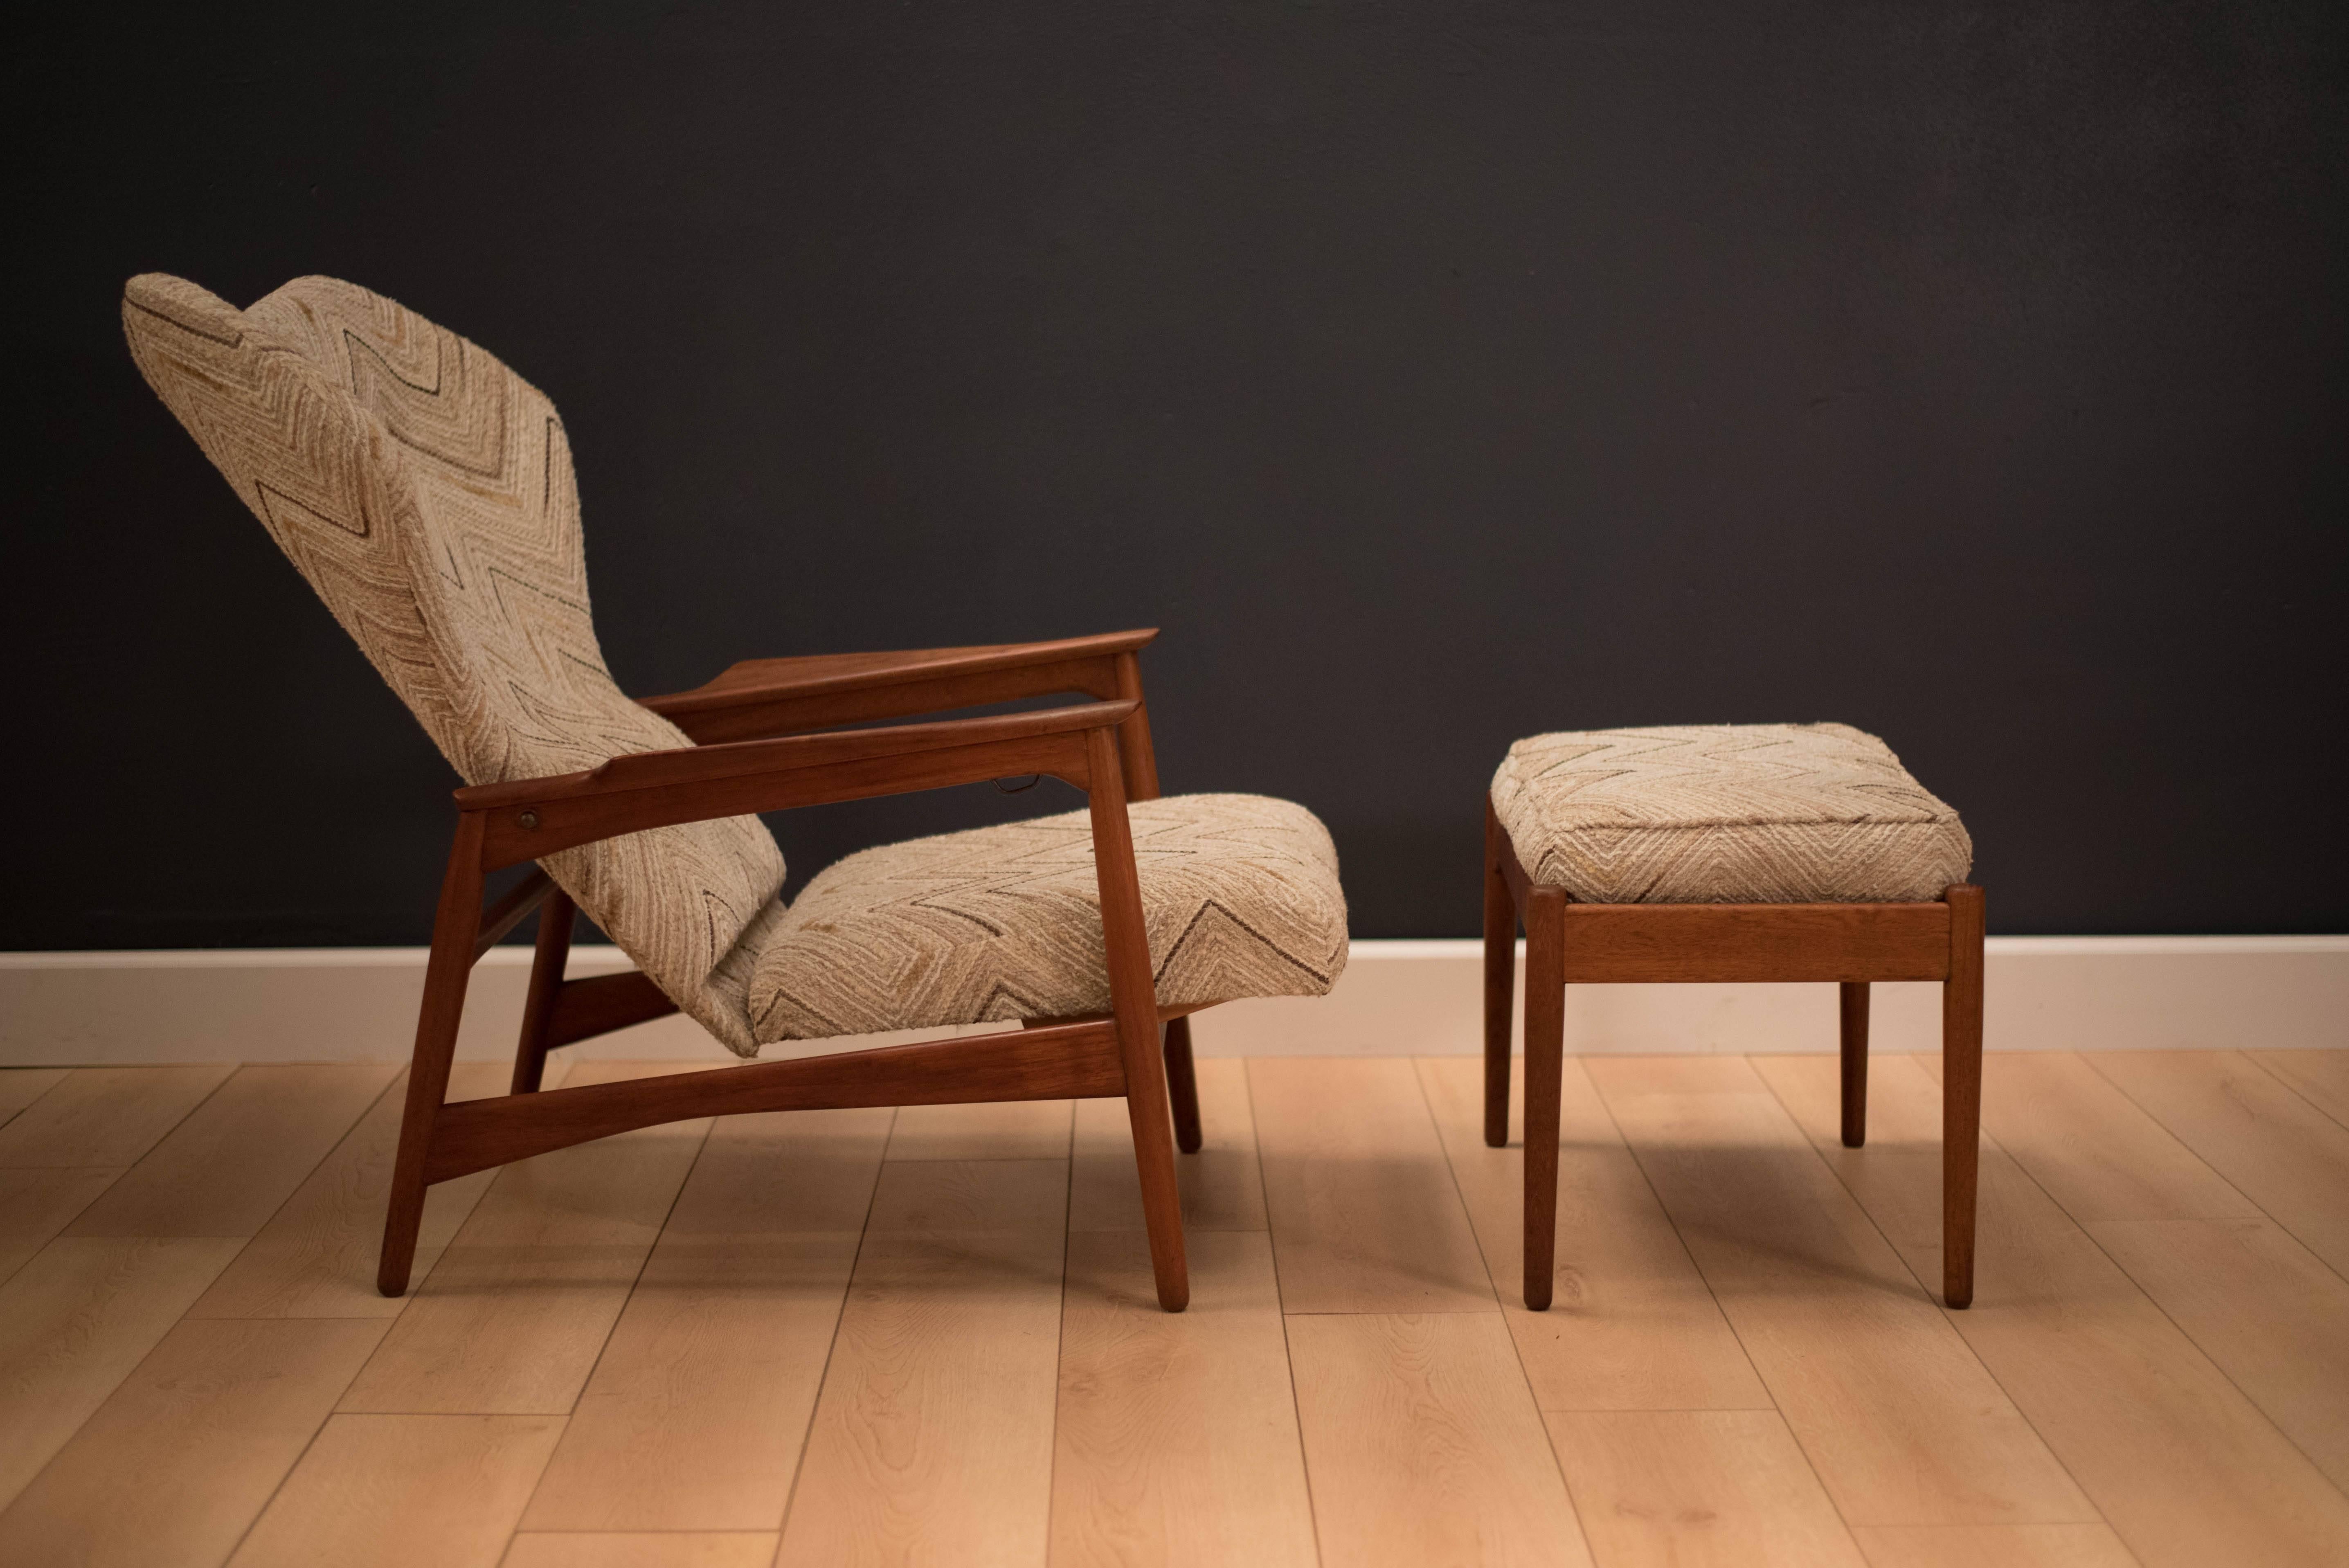 Mid-Century lounge chair by Ib Kofod-Larsen for Carlo Garhn in teak. This piece features a sculpted teak base that reclines by tilting back. Features a unique curved head rest and fabric is original to the piece. 

Lounge chair: 36" D fully